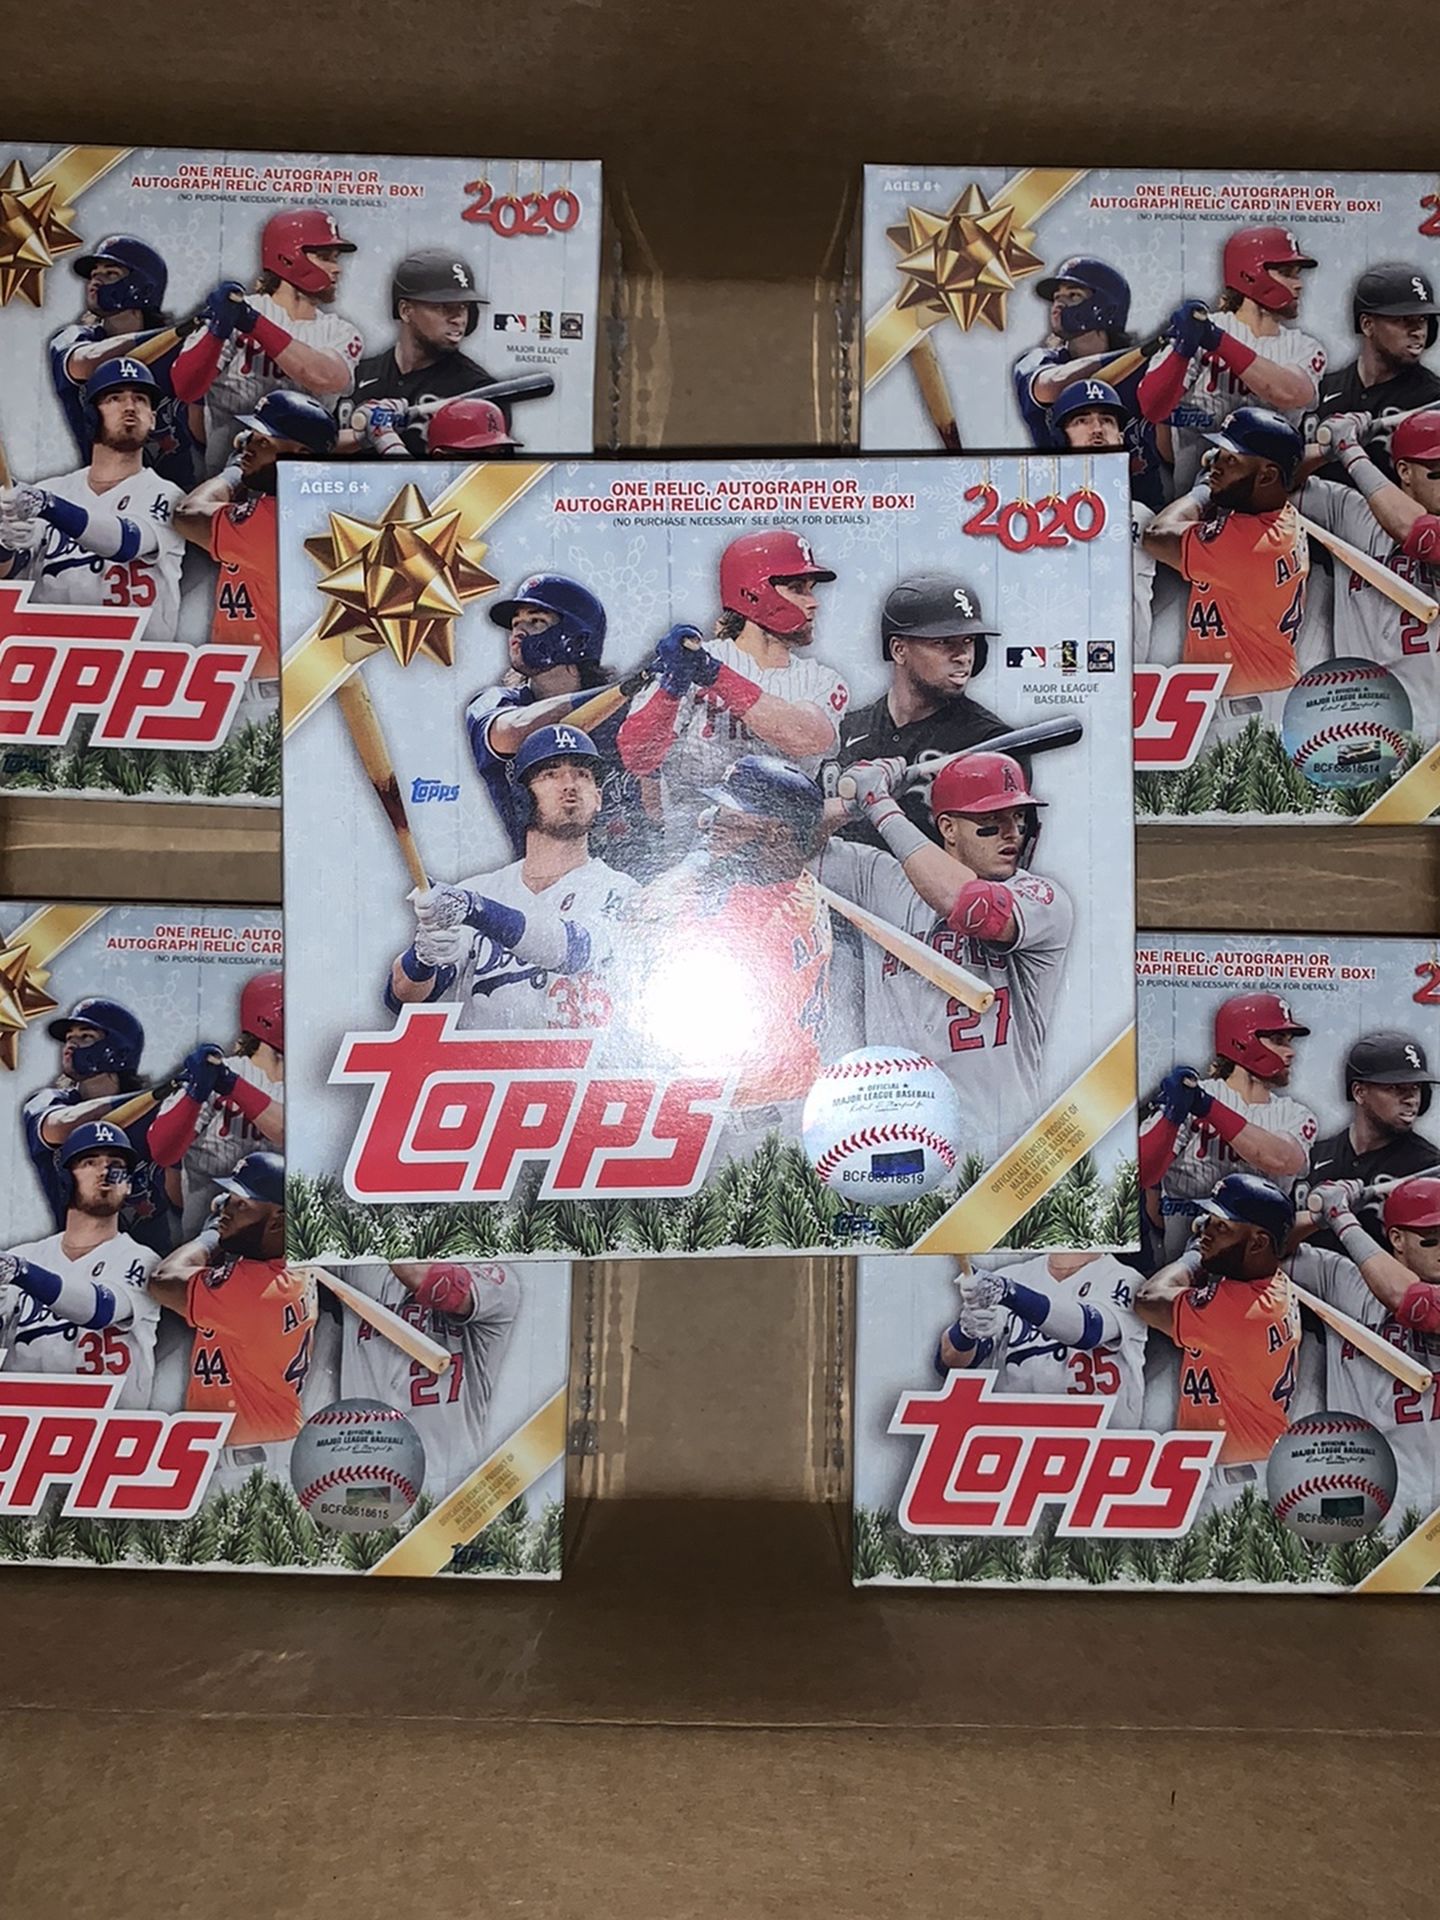 2020 Topps Holiday MLB Baseball Trading Cards Mega Box- 5 Metallic Holiday parallel cards | 1 autograph, relic, or autograph/relic card